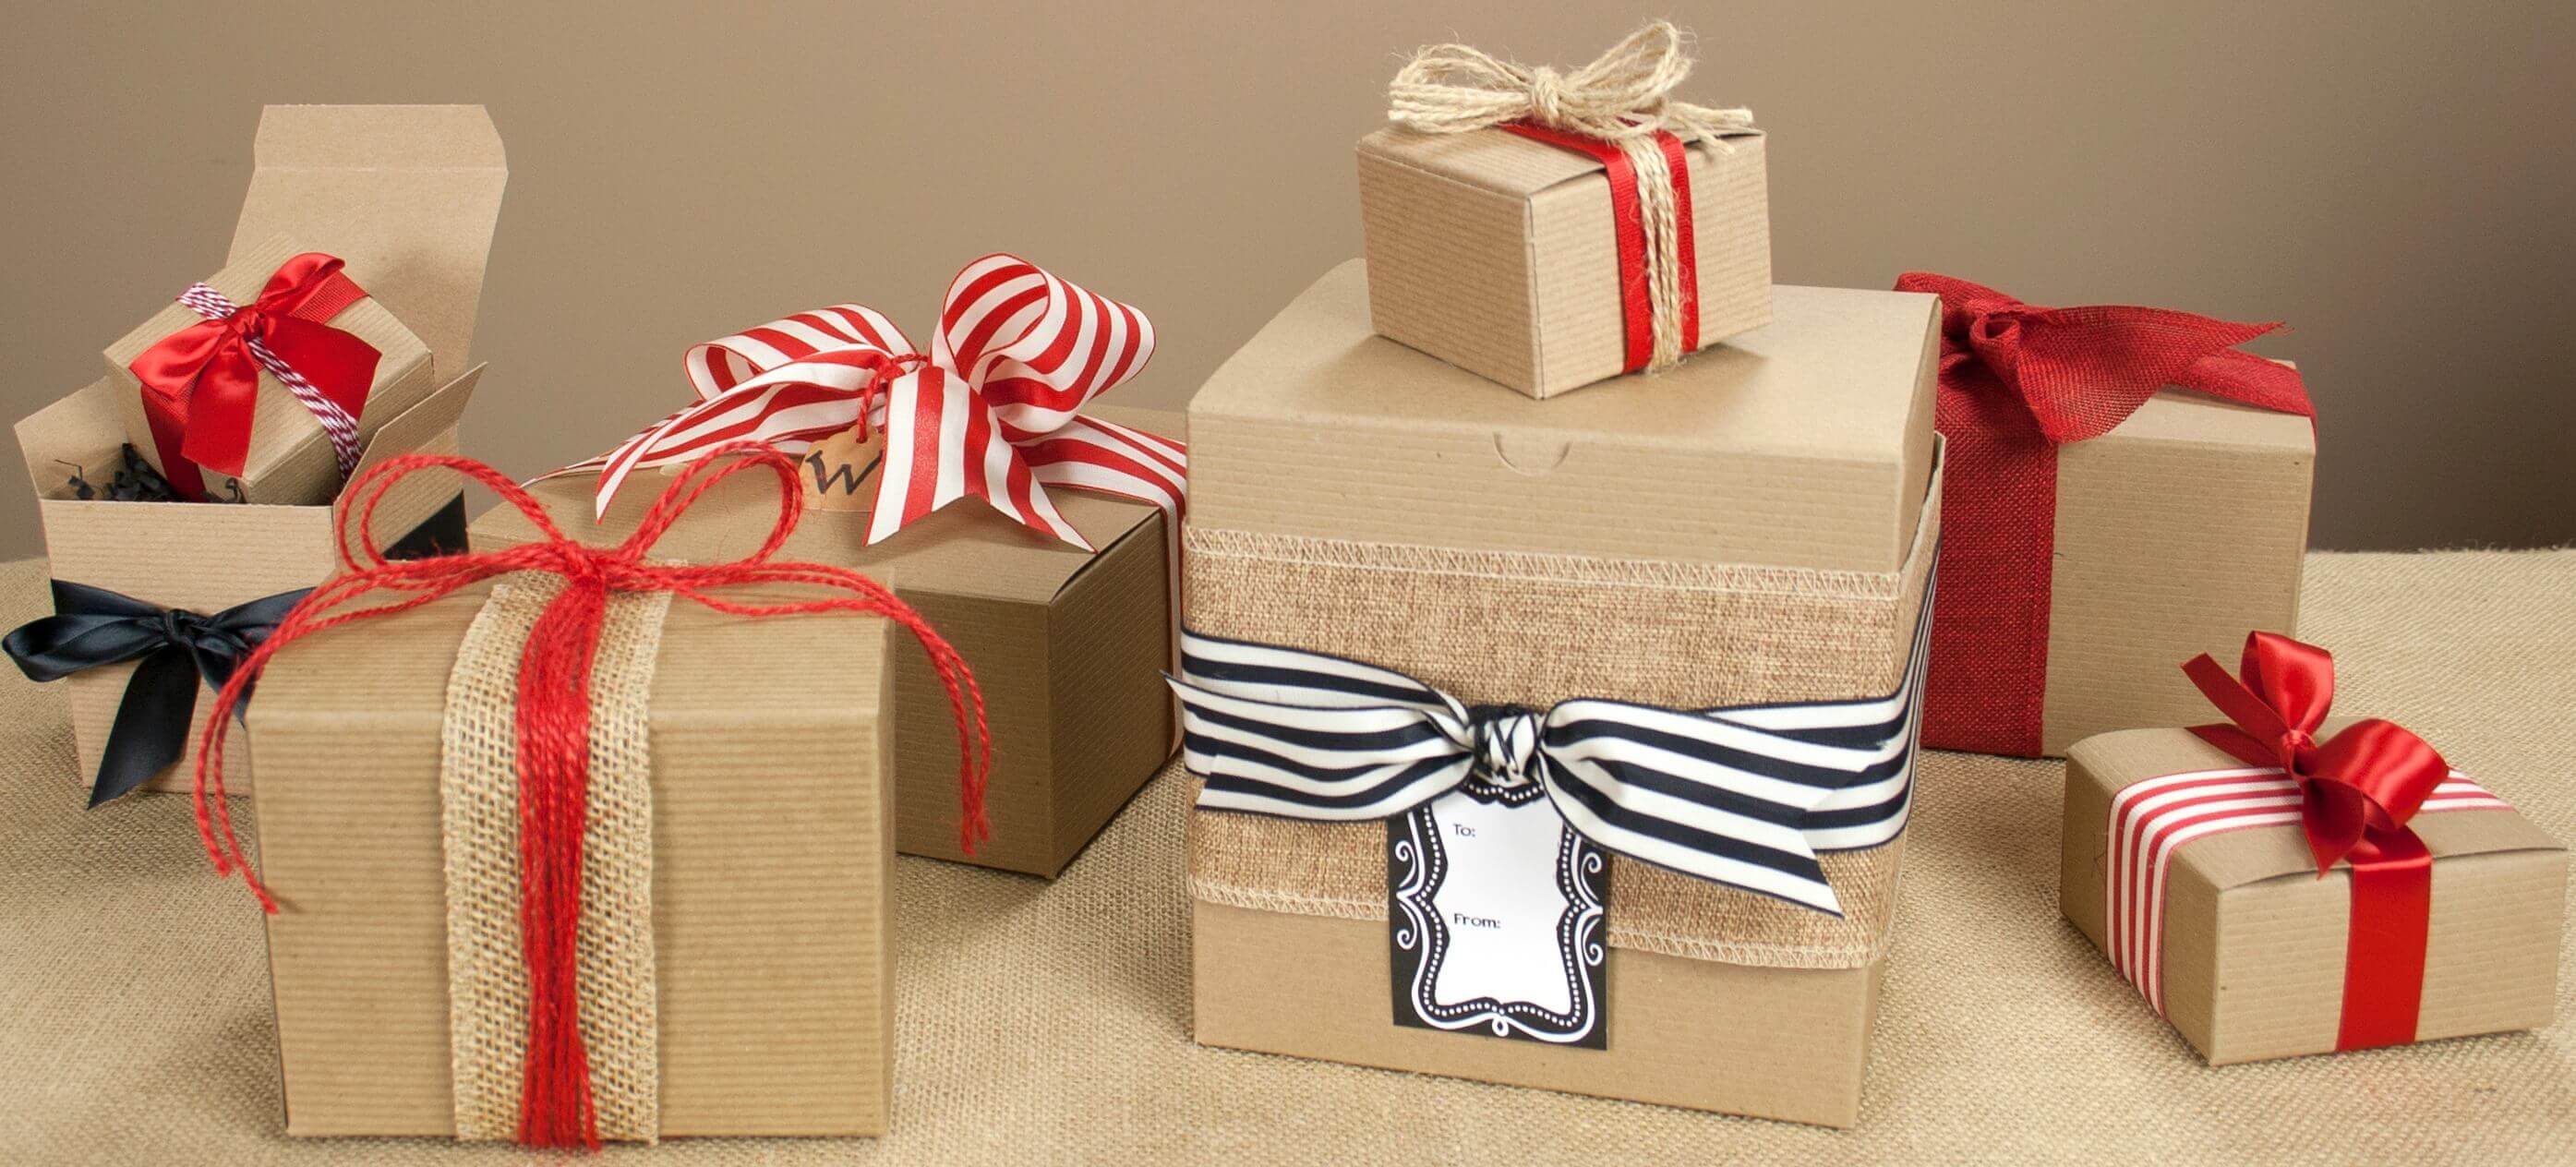 Gift Boxes With Pictures ~ 10 Best Christmas Gift Boxes | Bodeniwasues